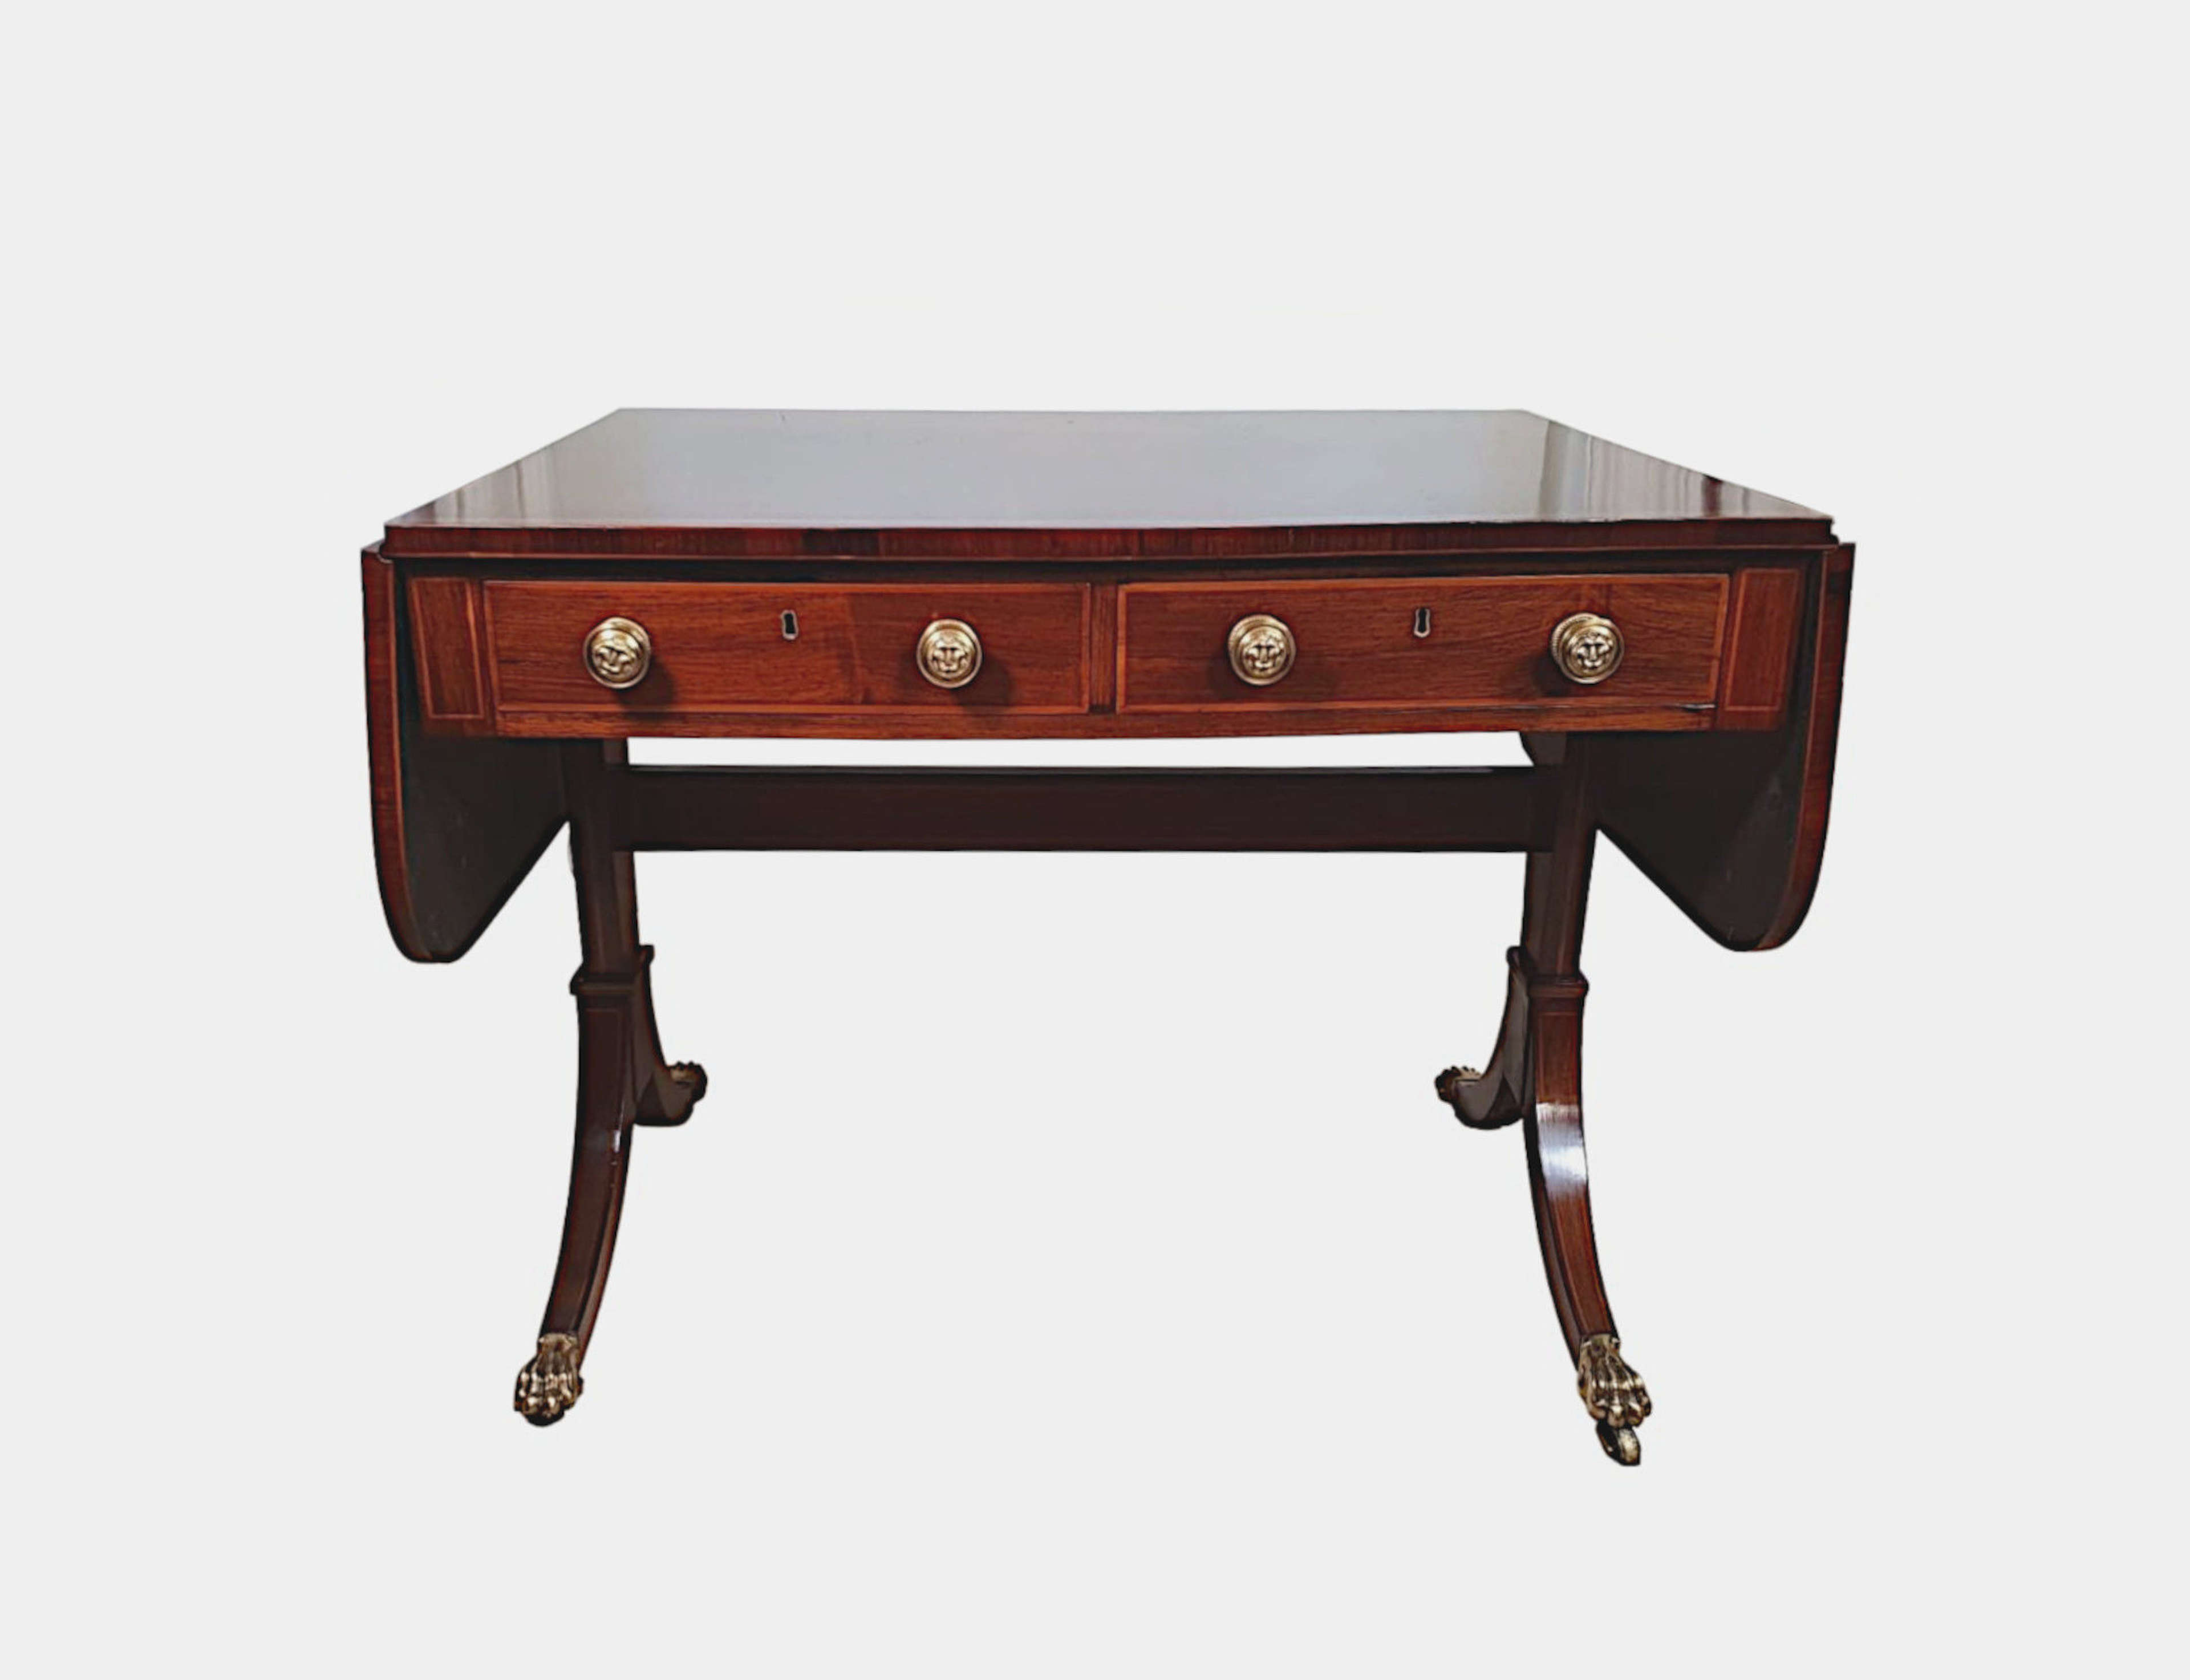 A Very Fine Early 19th Century Regency Inlaid Sofa Table